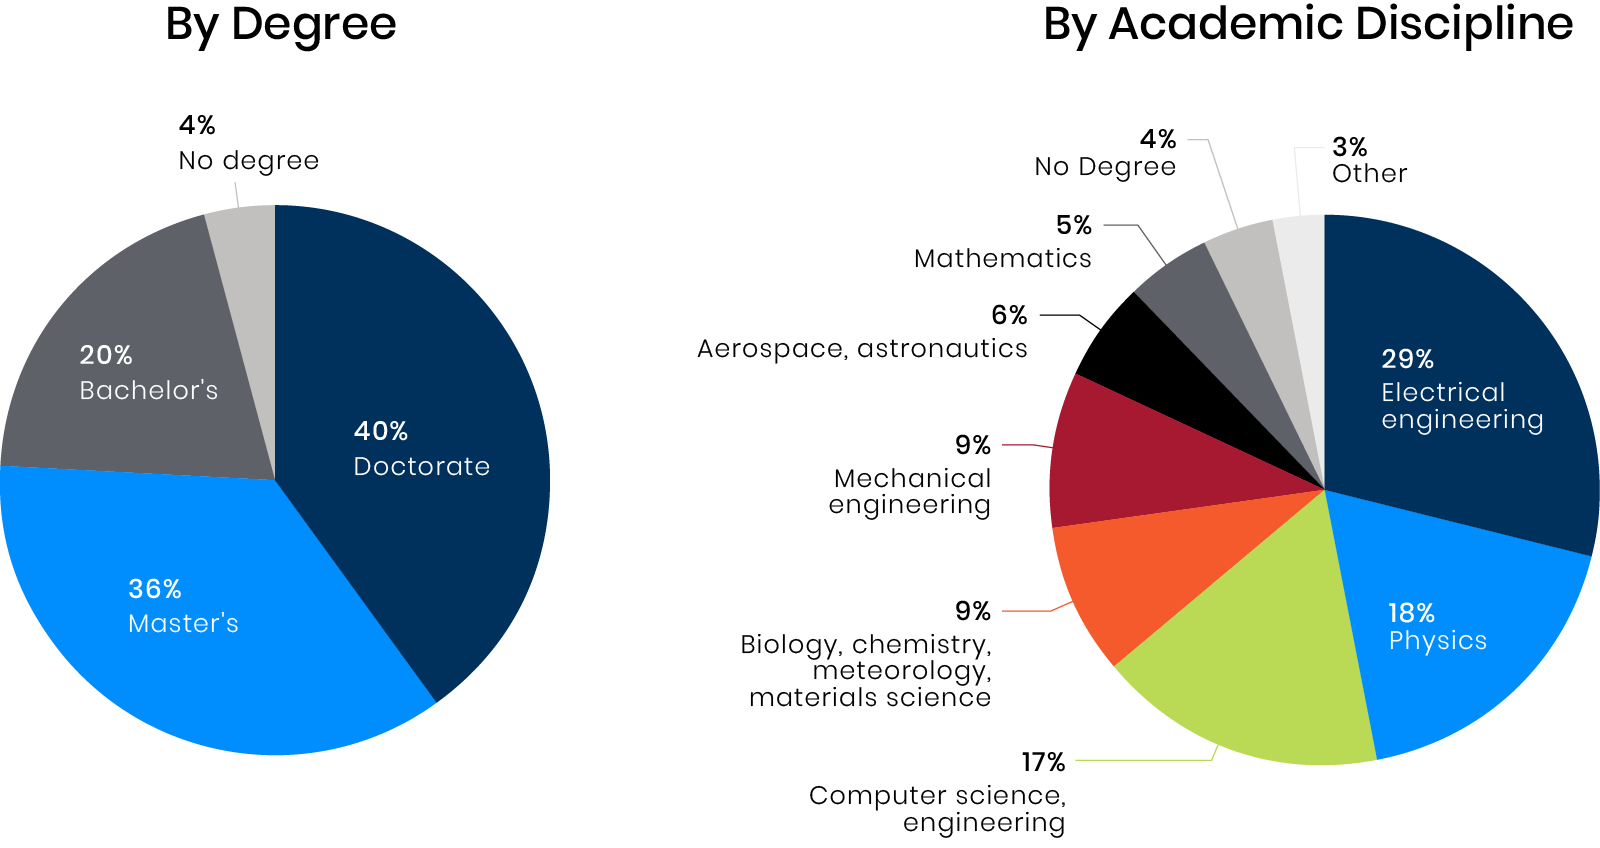 composition pie charts of professional staff by degree and academic discipline.